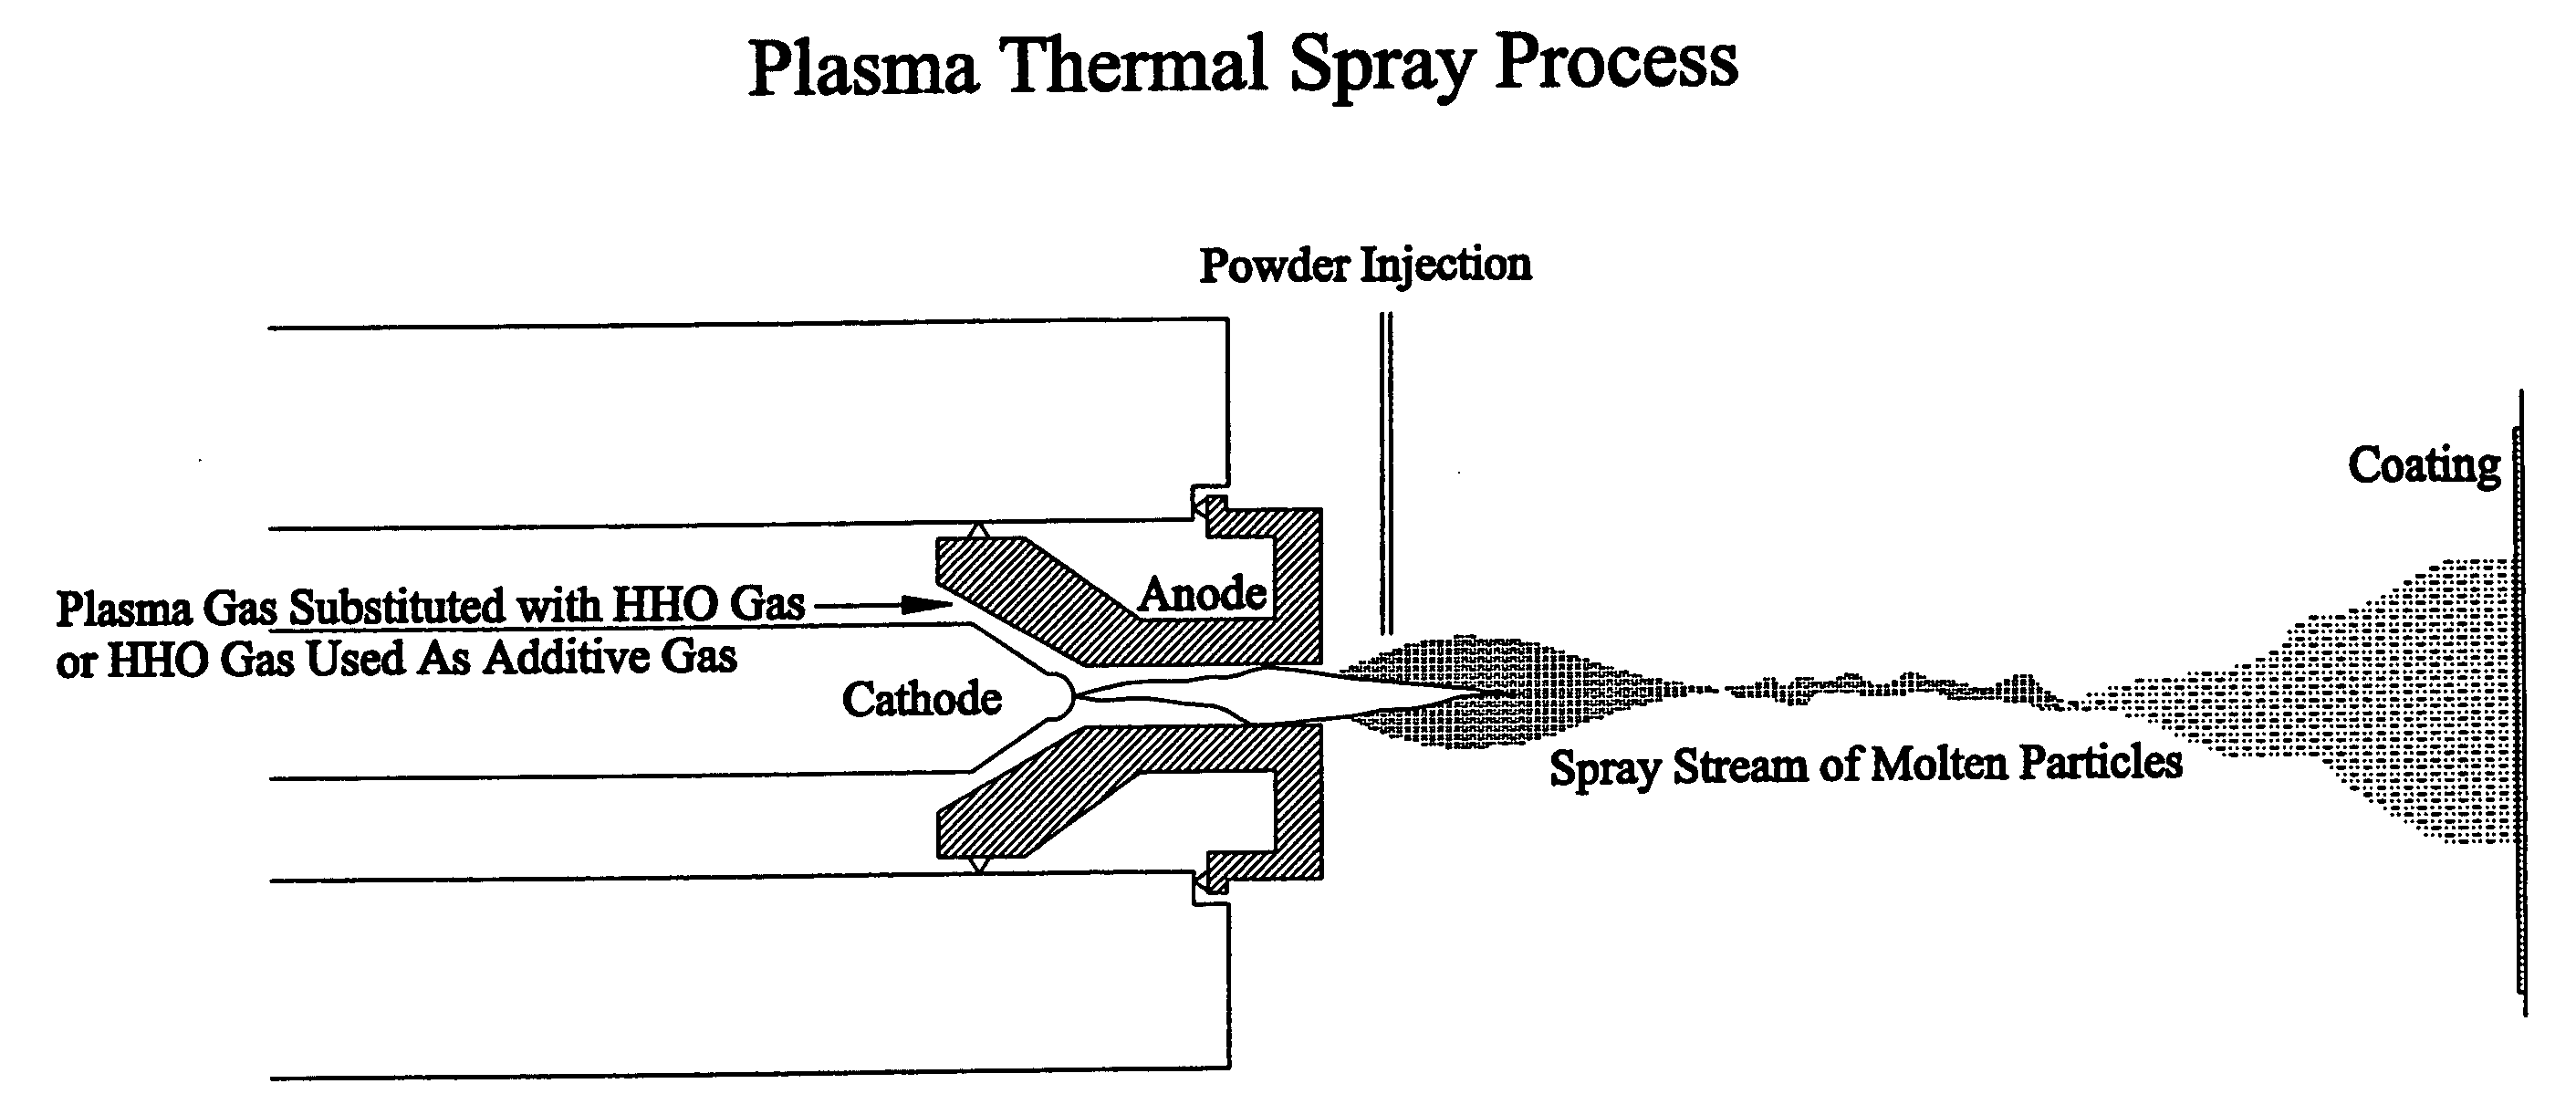 Thermal spray coating processes using HHO gas generated from an electrolyzer generator